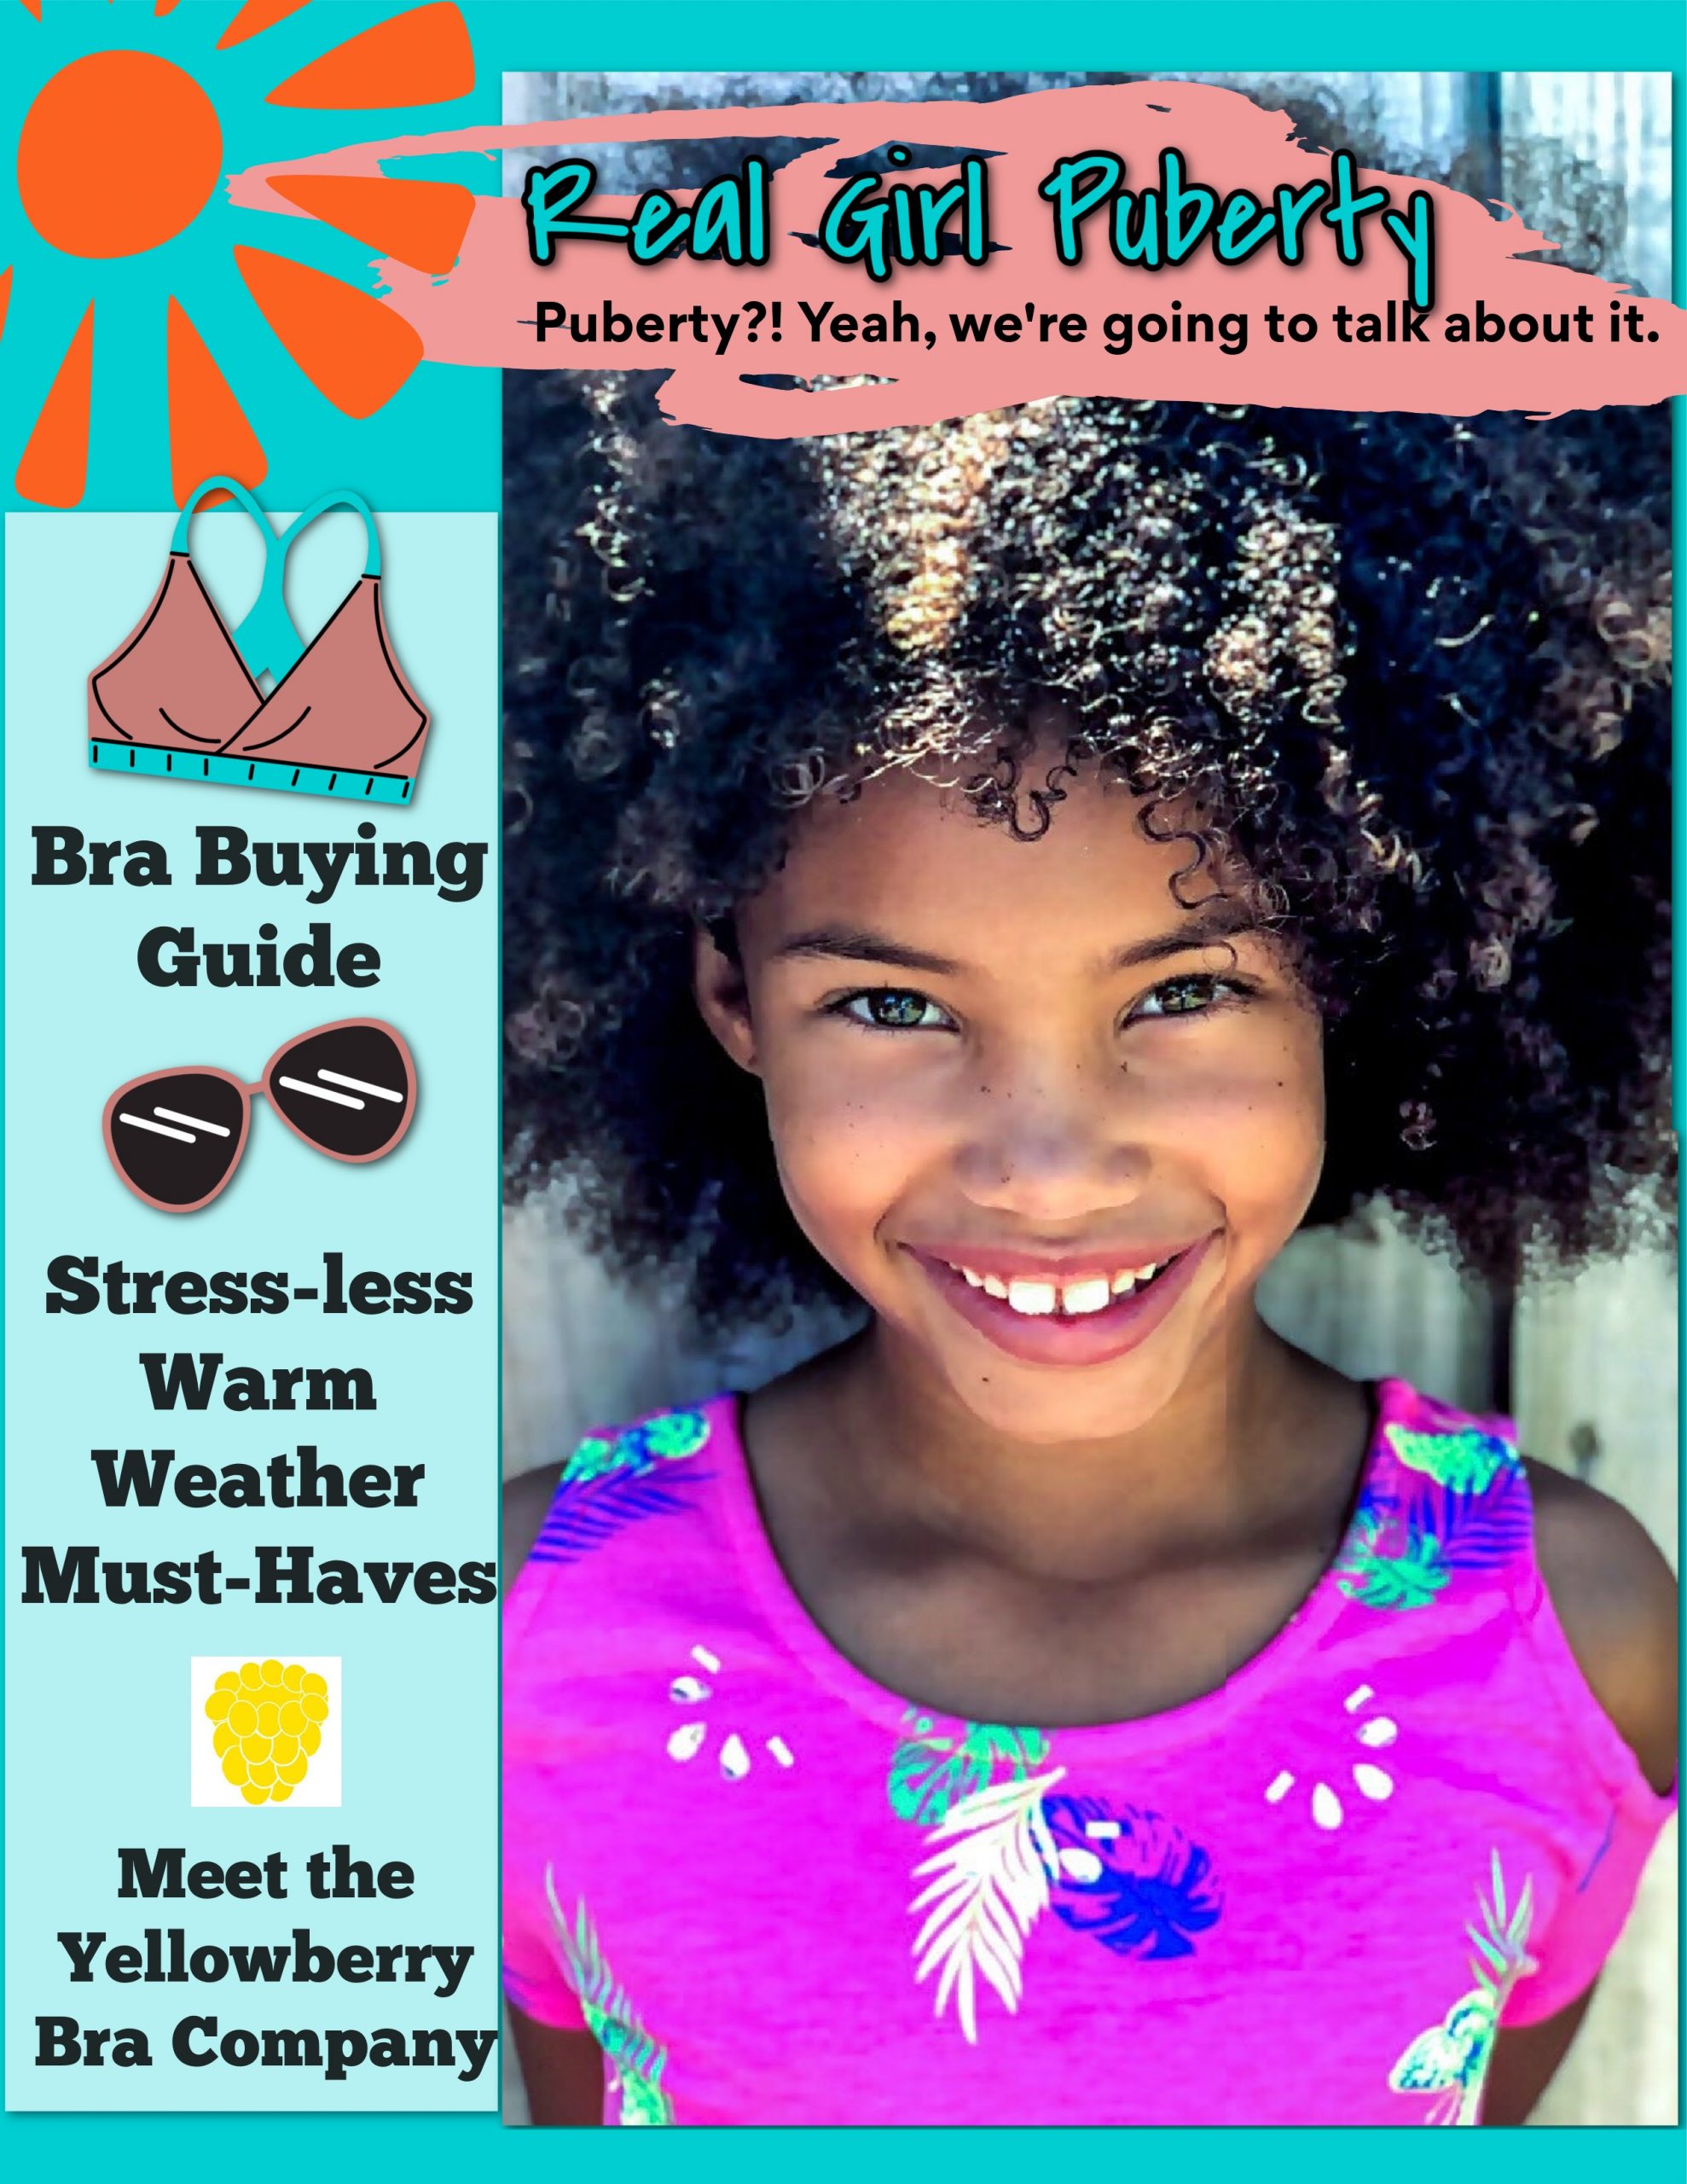 Real Girl Puberty Magazine - The Breasts & Bras Issue - Real Girl Puberty